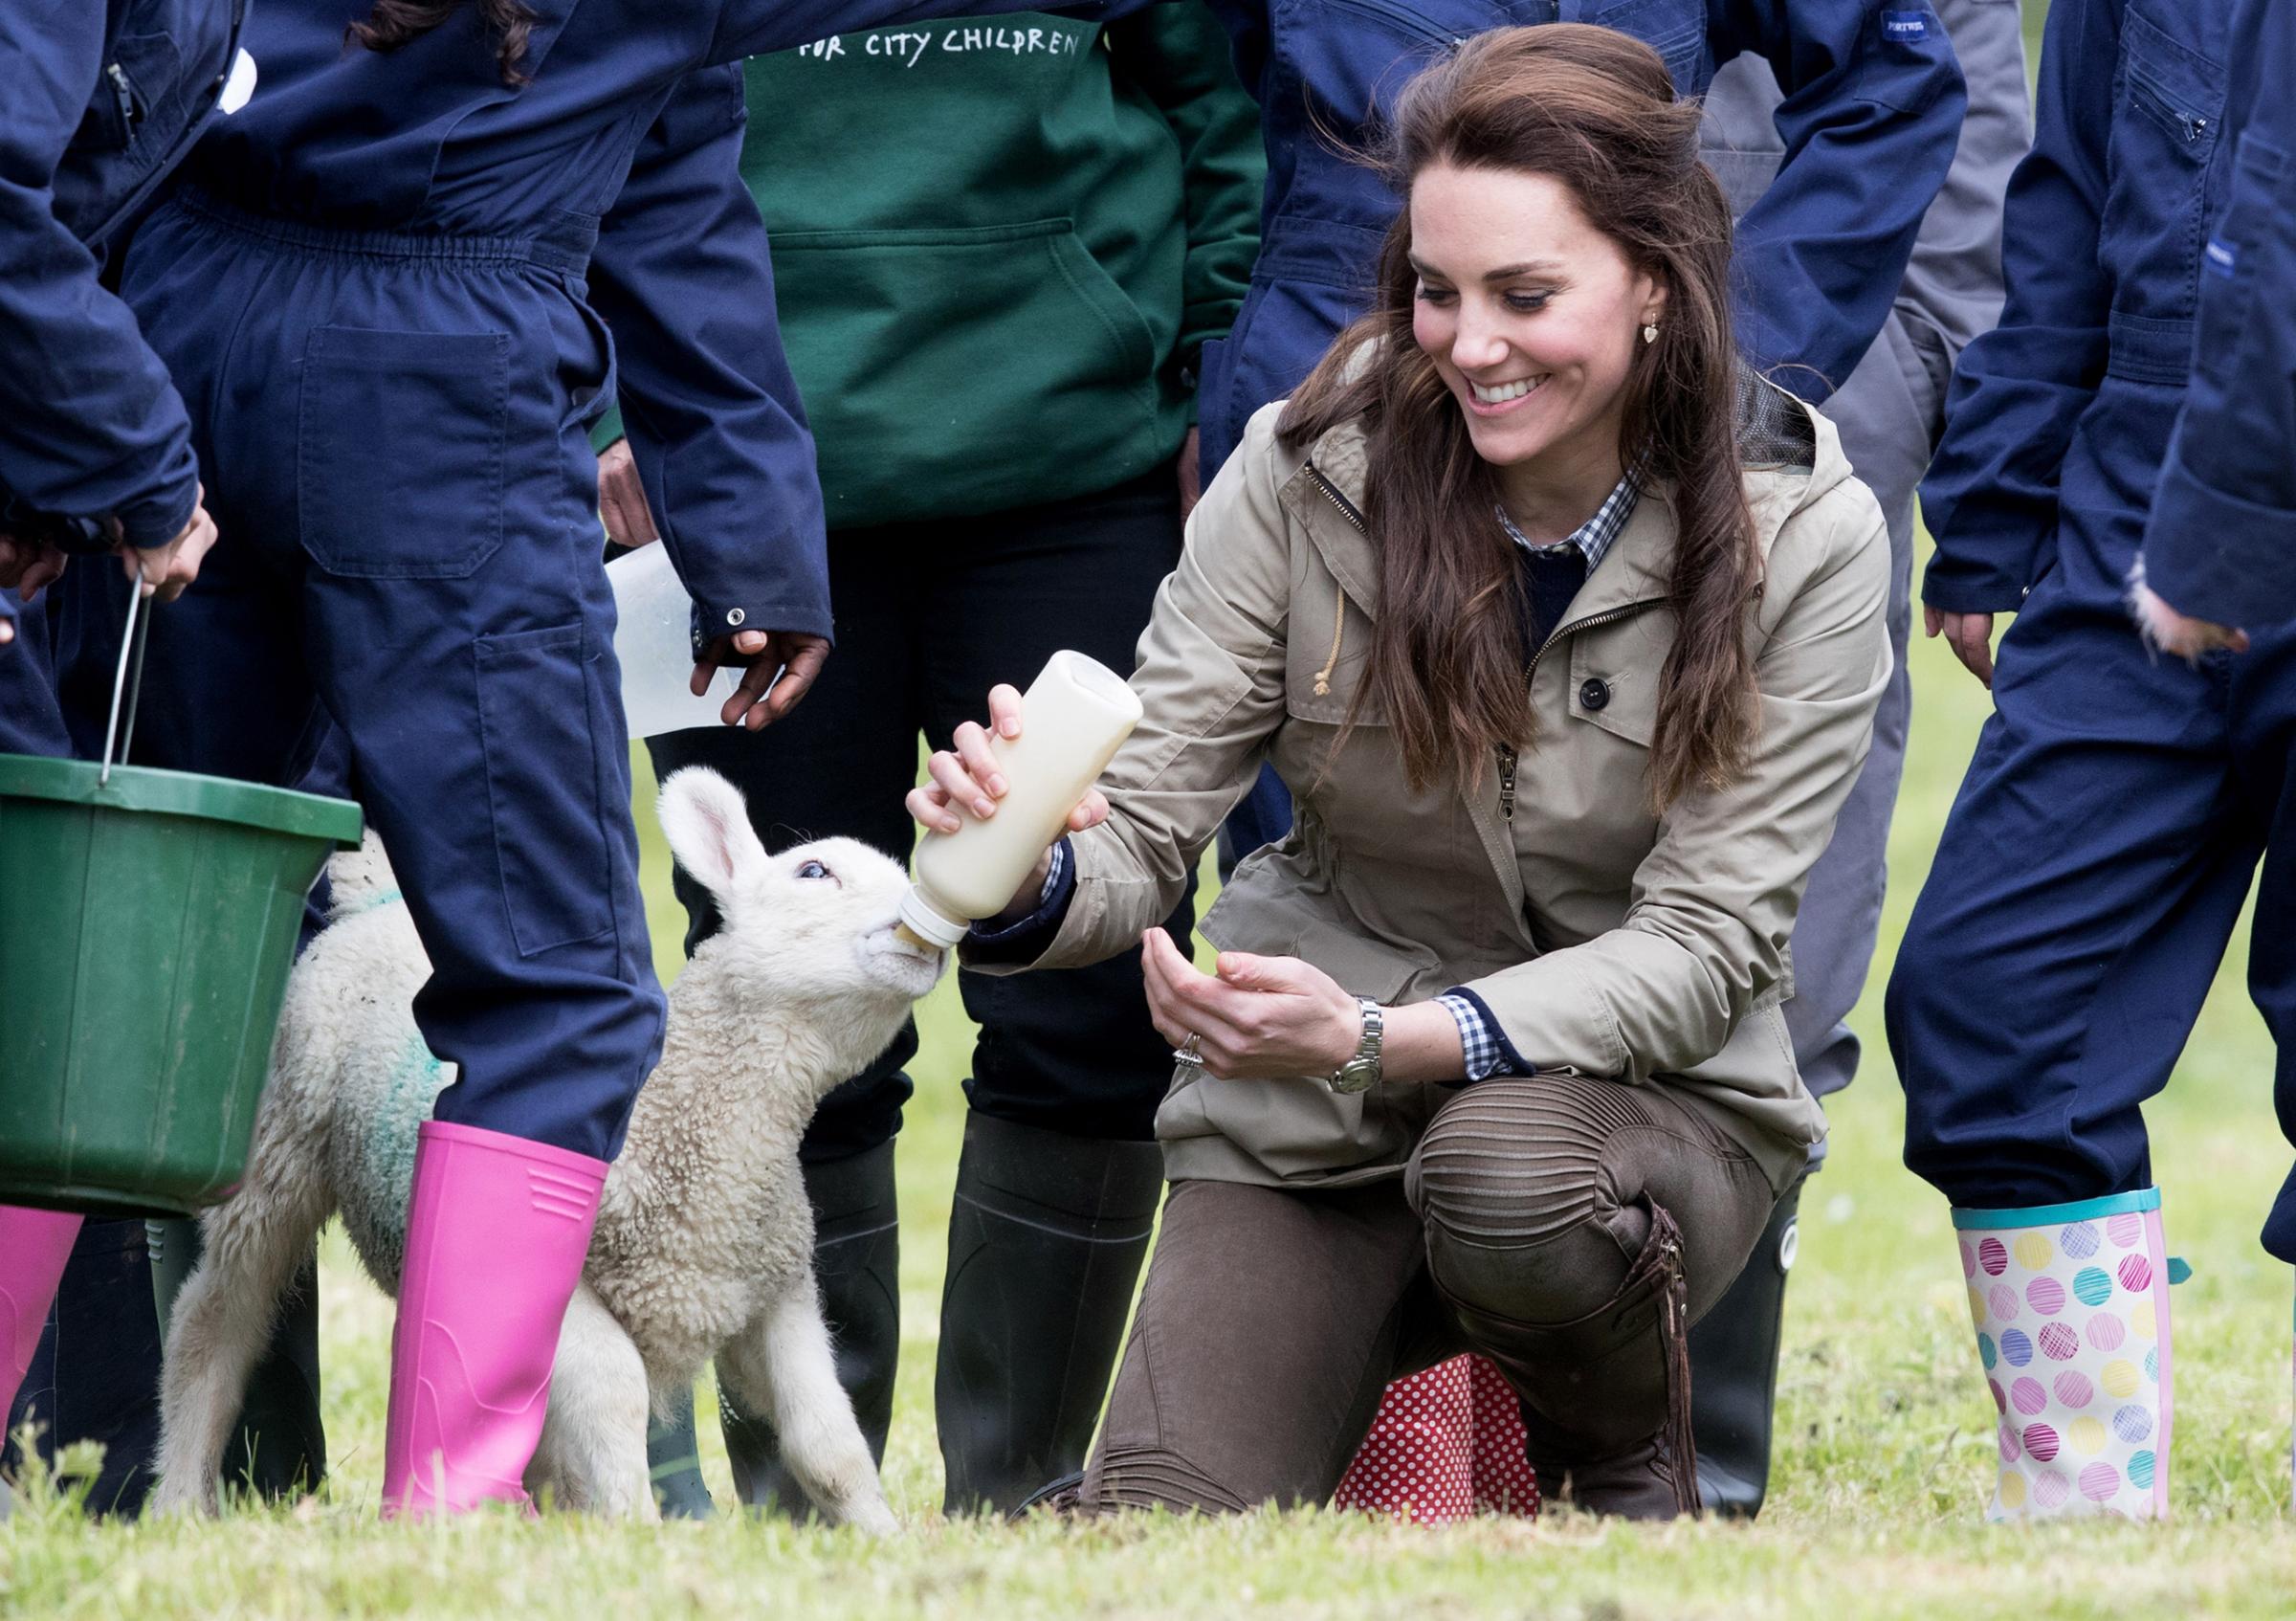 Catherine, Duchess of Cambridge feeds "Stinky" the lamb during a visit to Author Michael Morpurgo's Farms for City Children in Arlingham, Gloucestershire, on May 3, 2017.